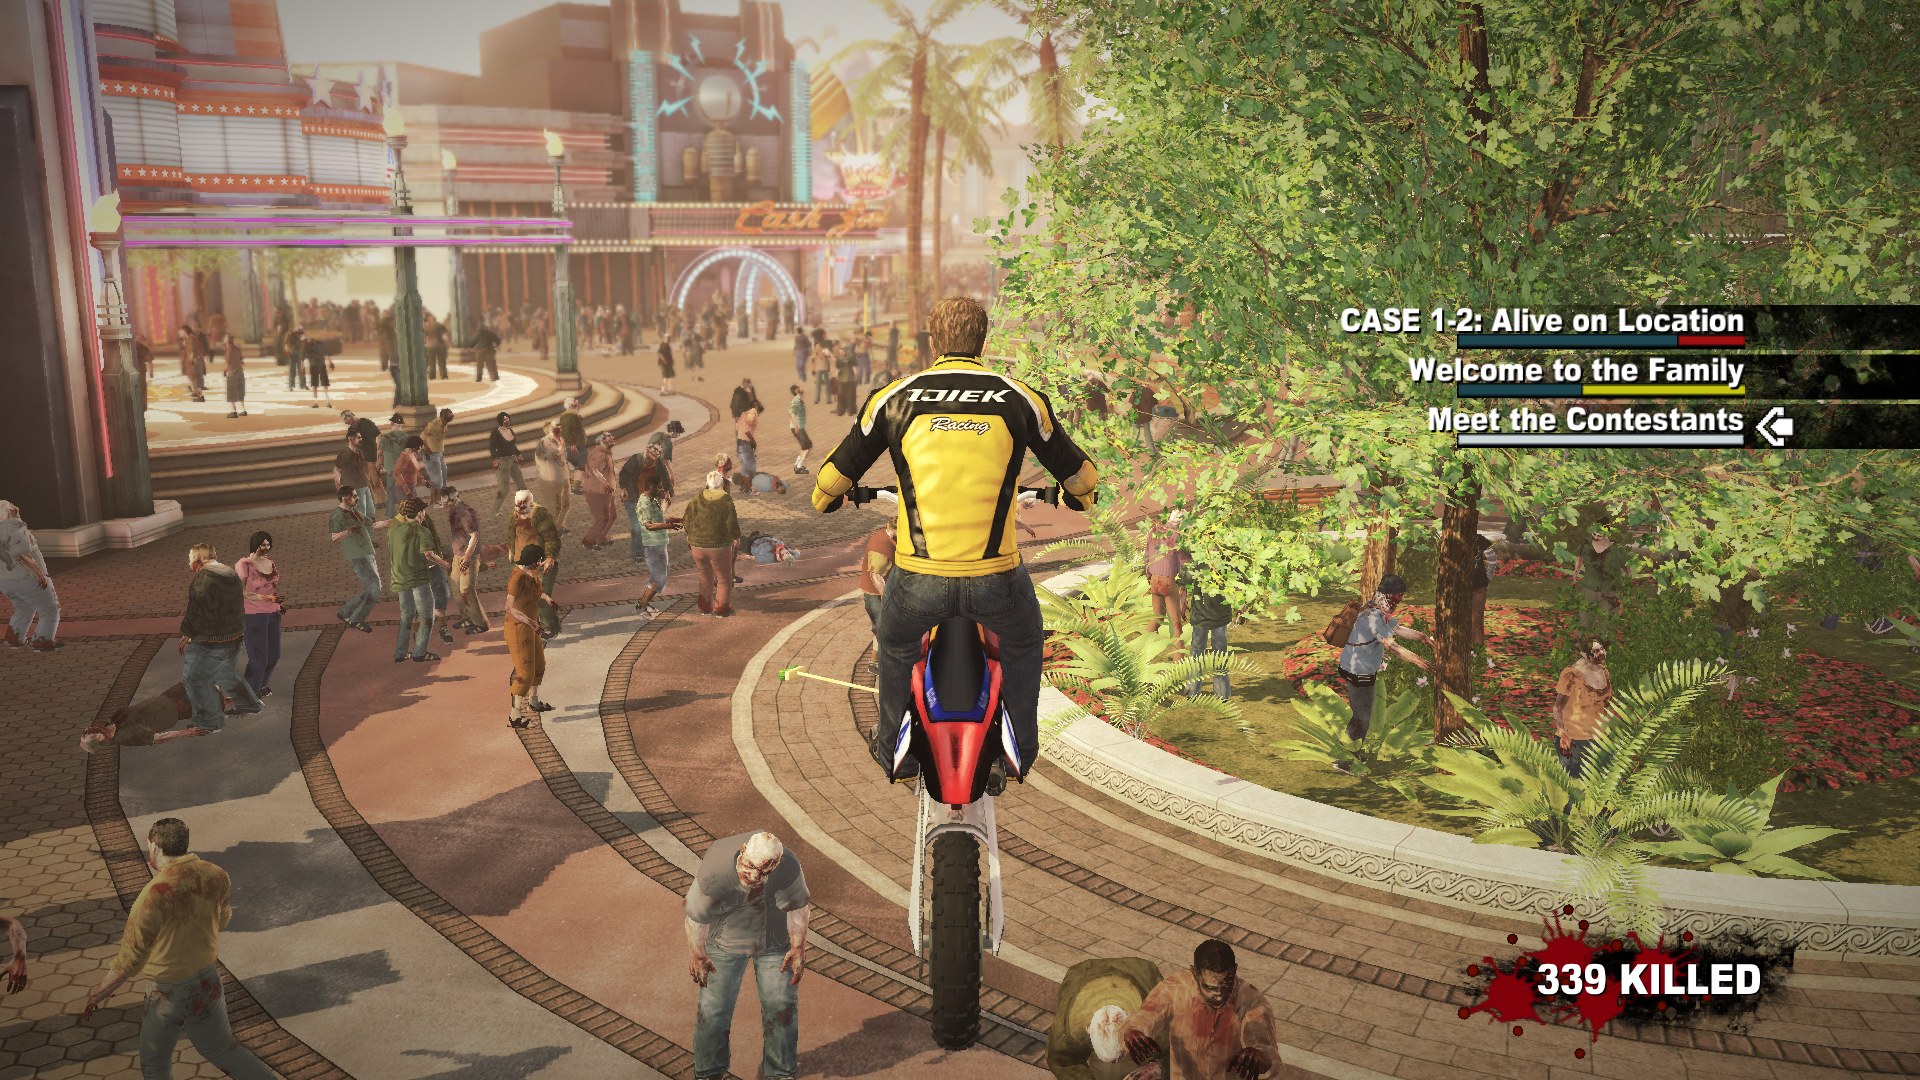 XB1 Dead Rising 3 - Regular or Apocalypse Edition - DLC MAY NOT BE